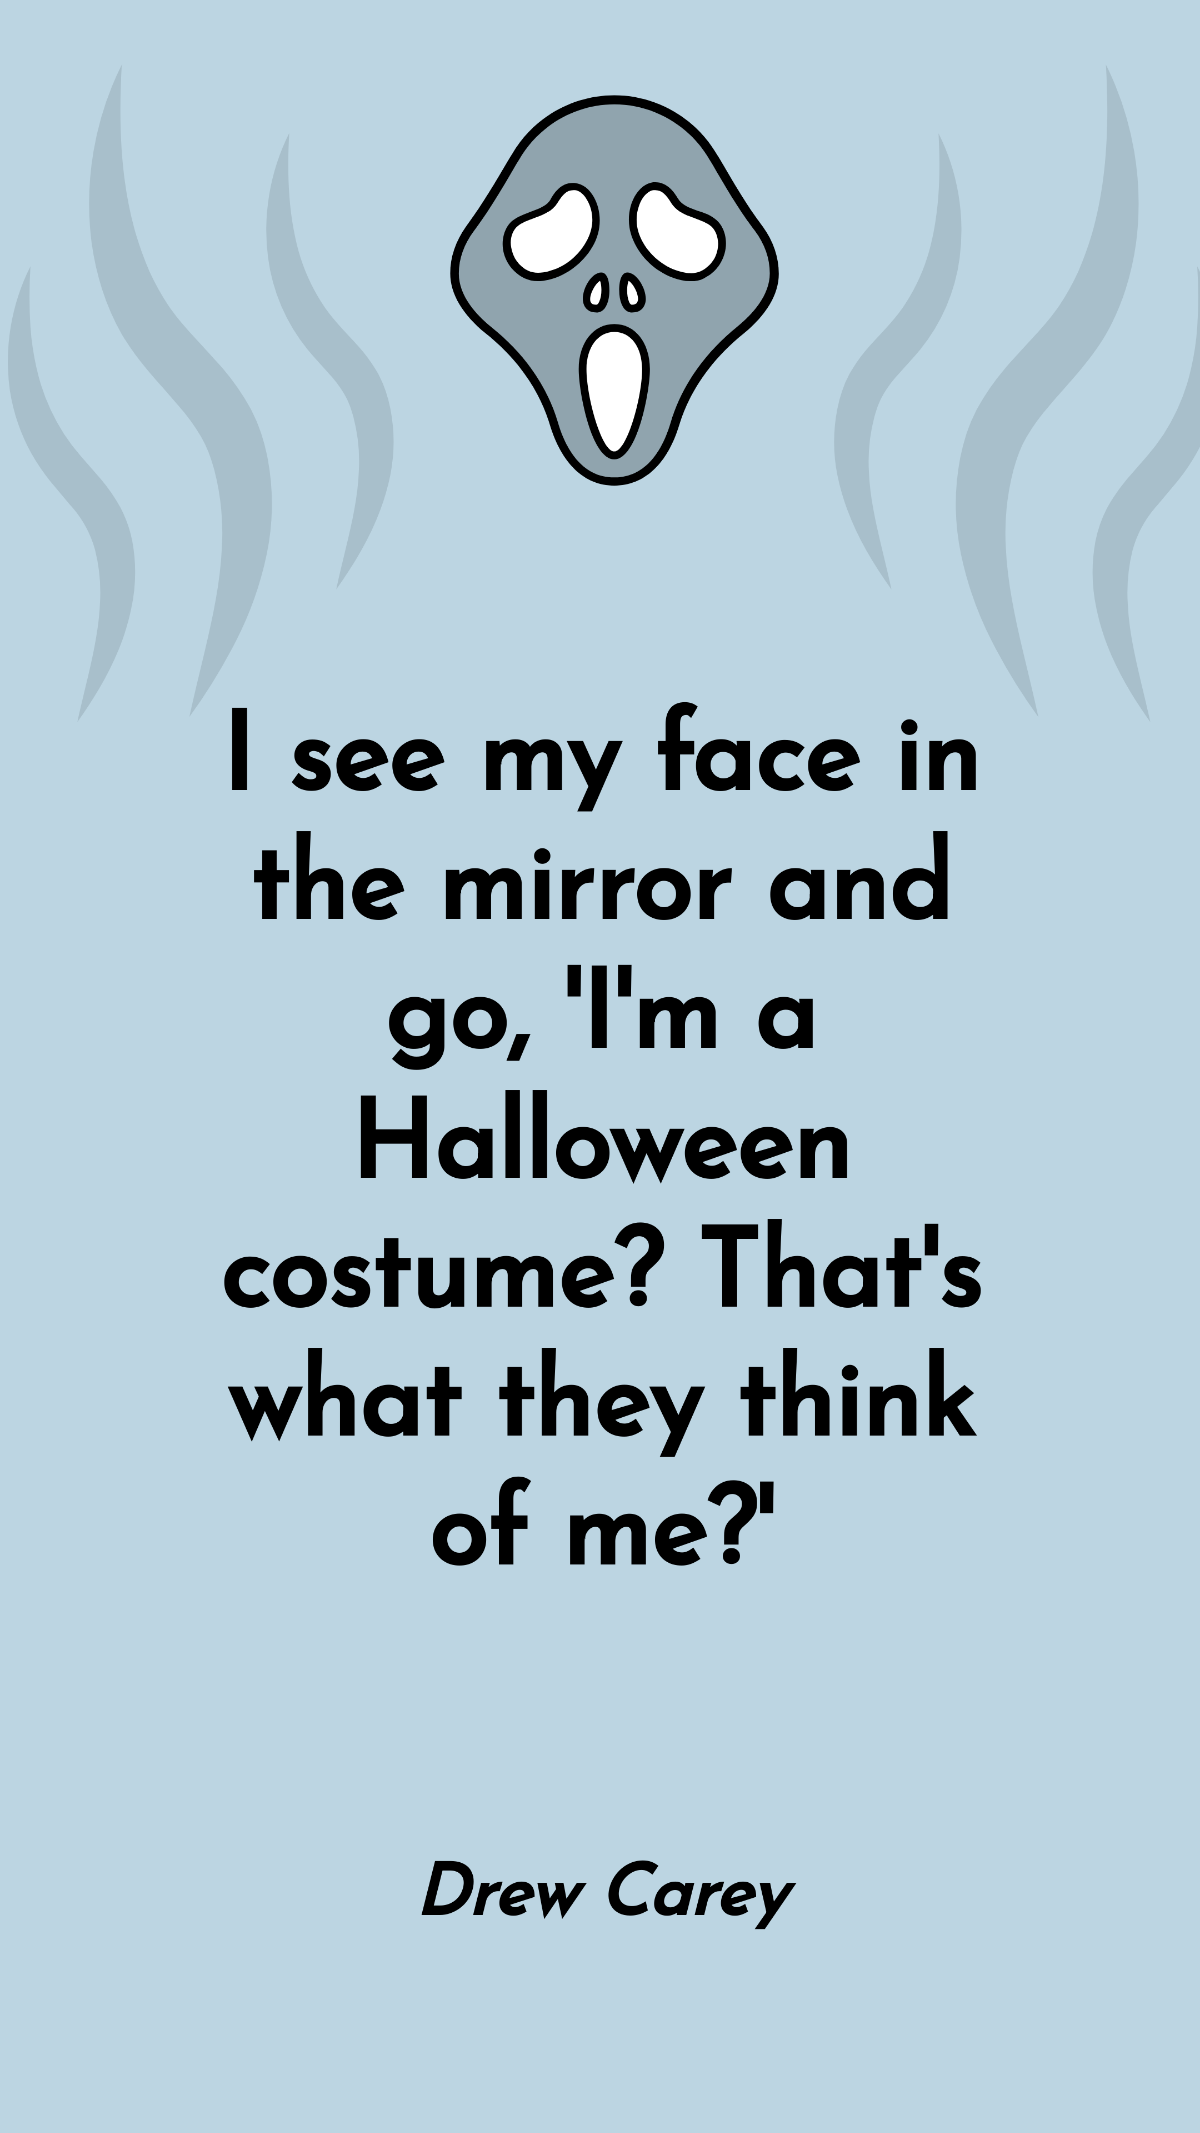 Drew Carey - I see my face in the mirror and go, 'I'm a Halloween costume? That's what they think of me?' Template